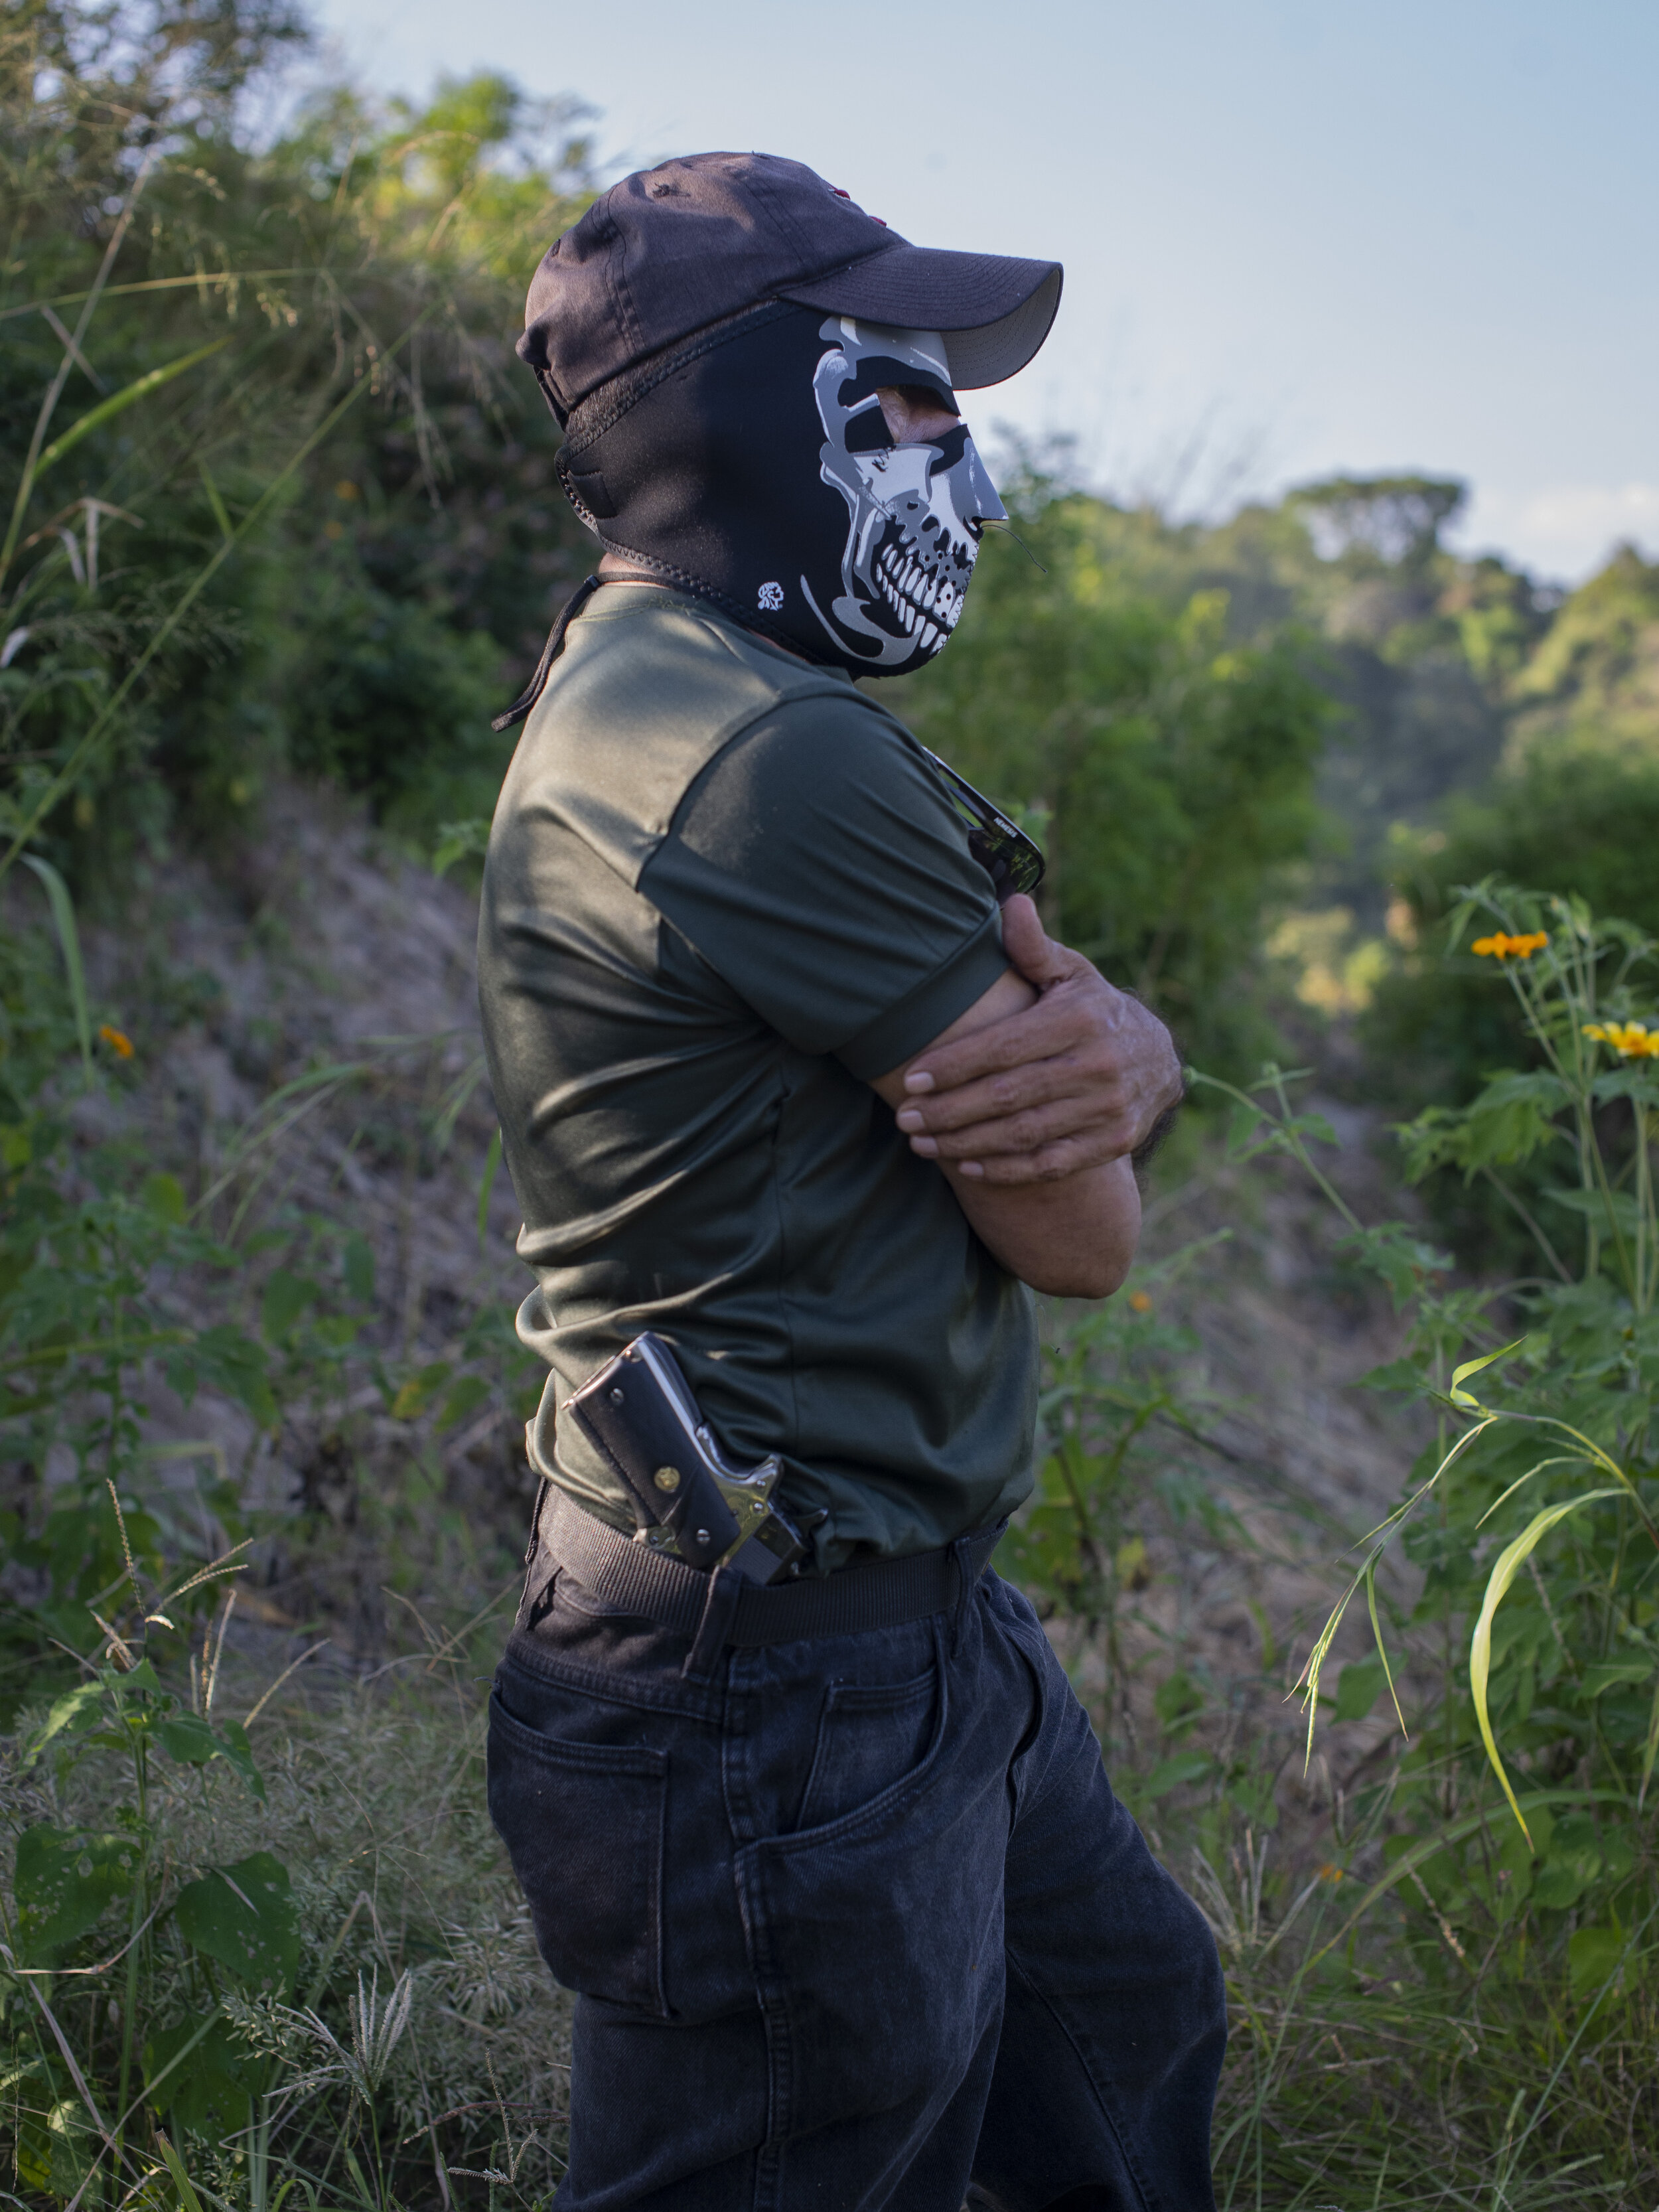  An armed civilian stands on patrol in the Anemona Community in San Martin just outside of San Salvador. 